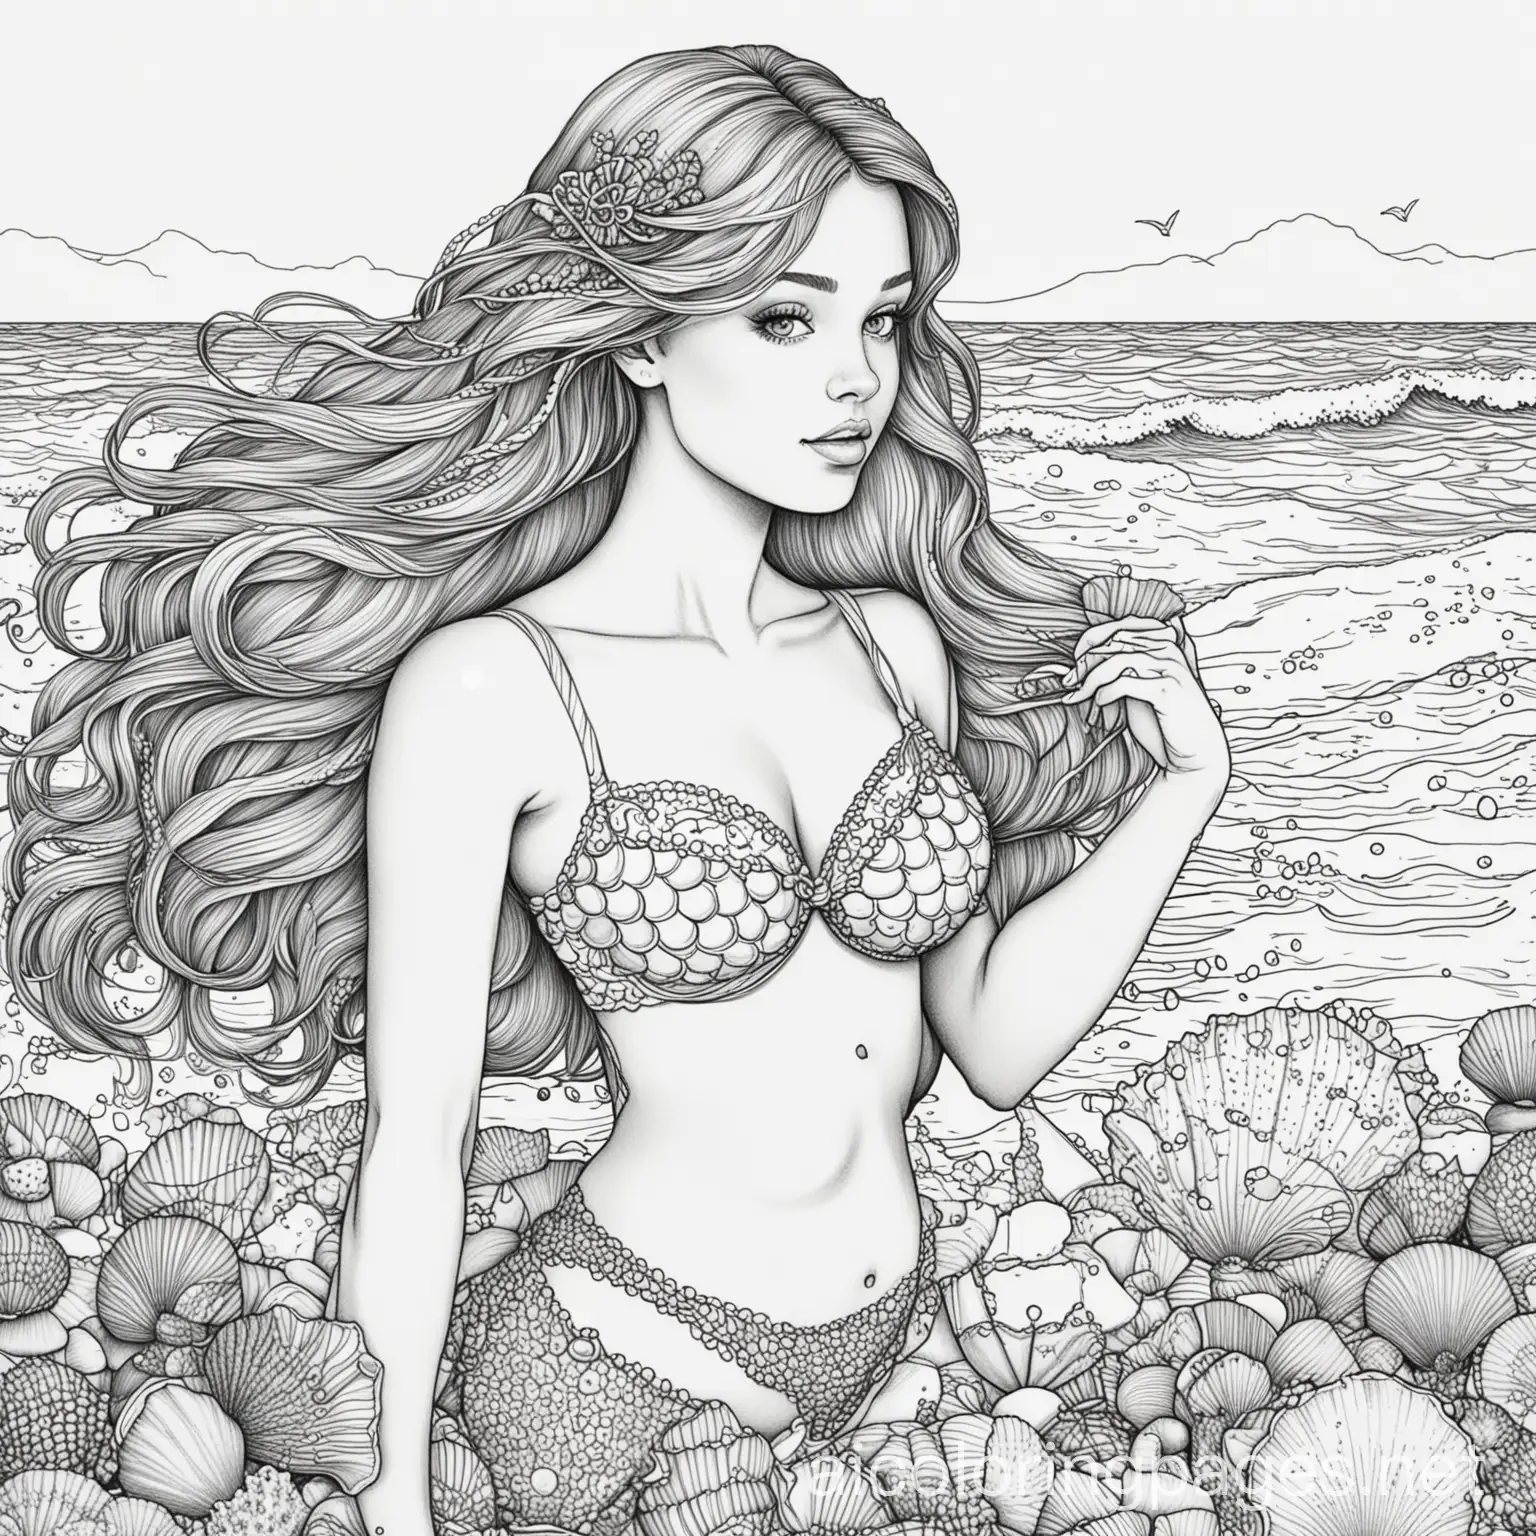 Mermaid-Coloring-Page-with-Seashell-Bra-on-Beach